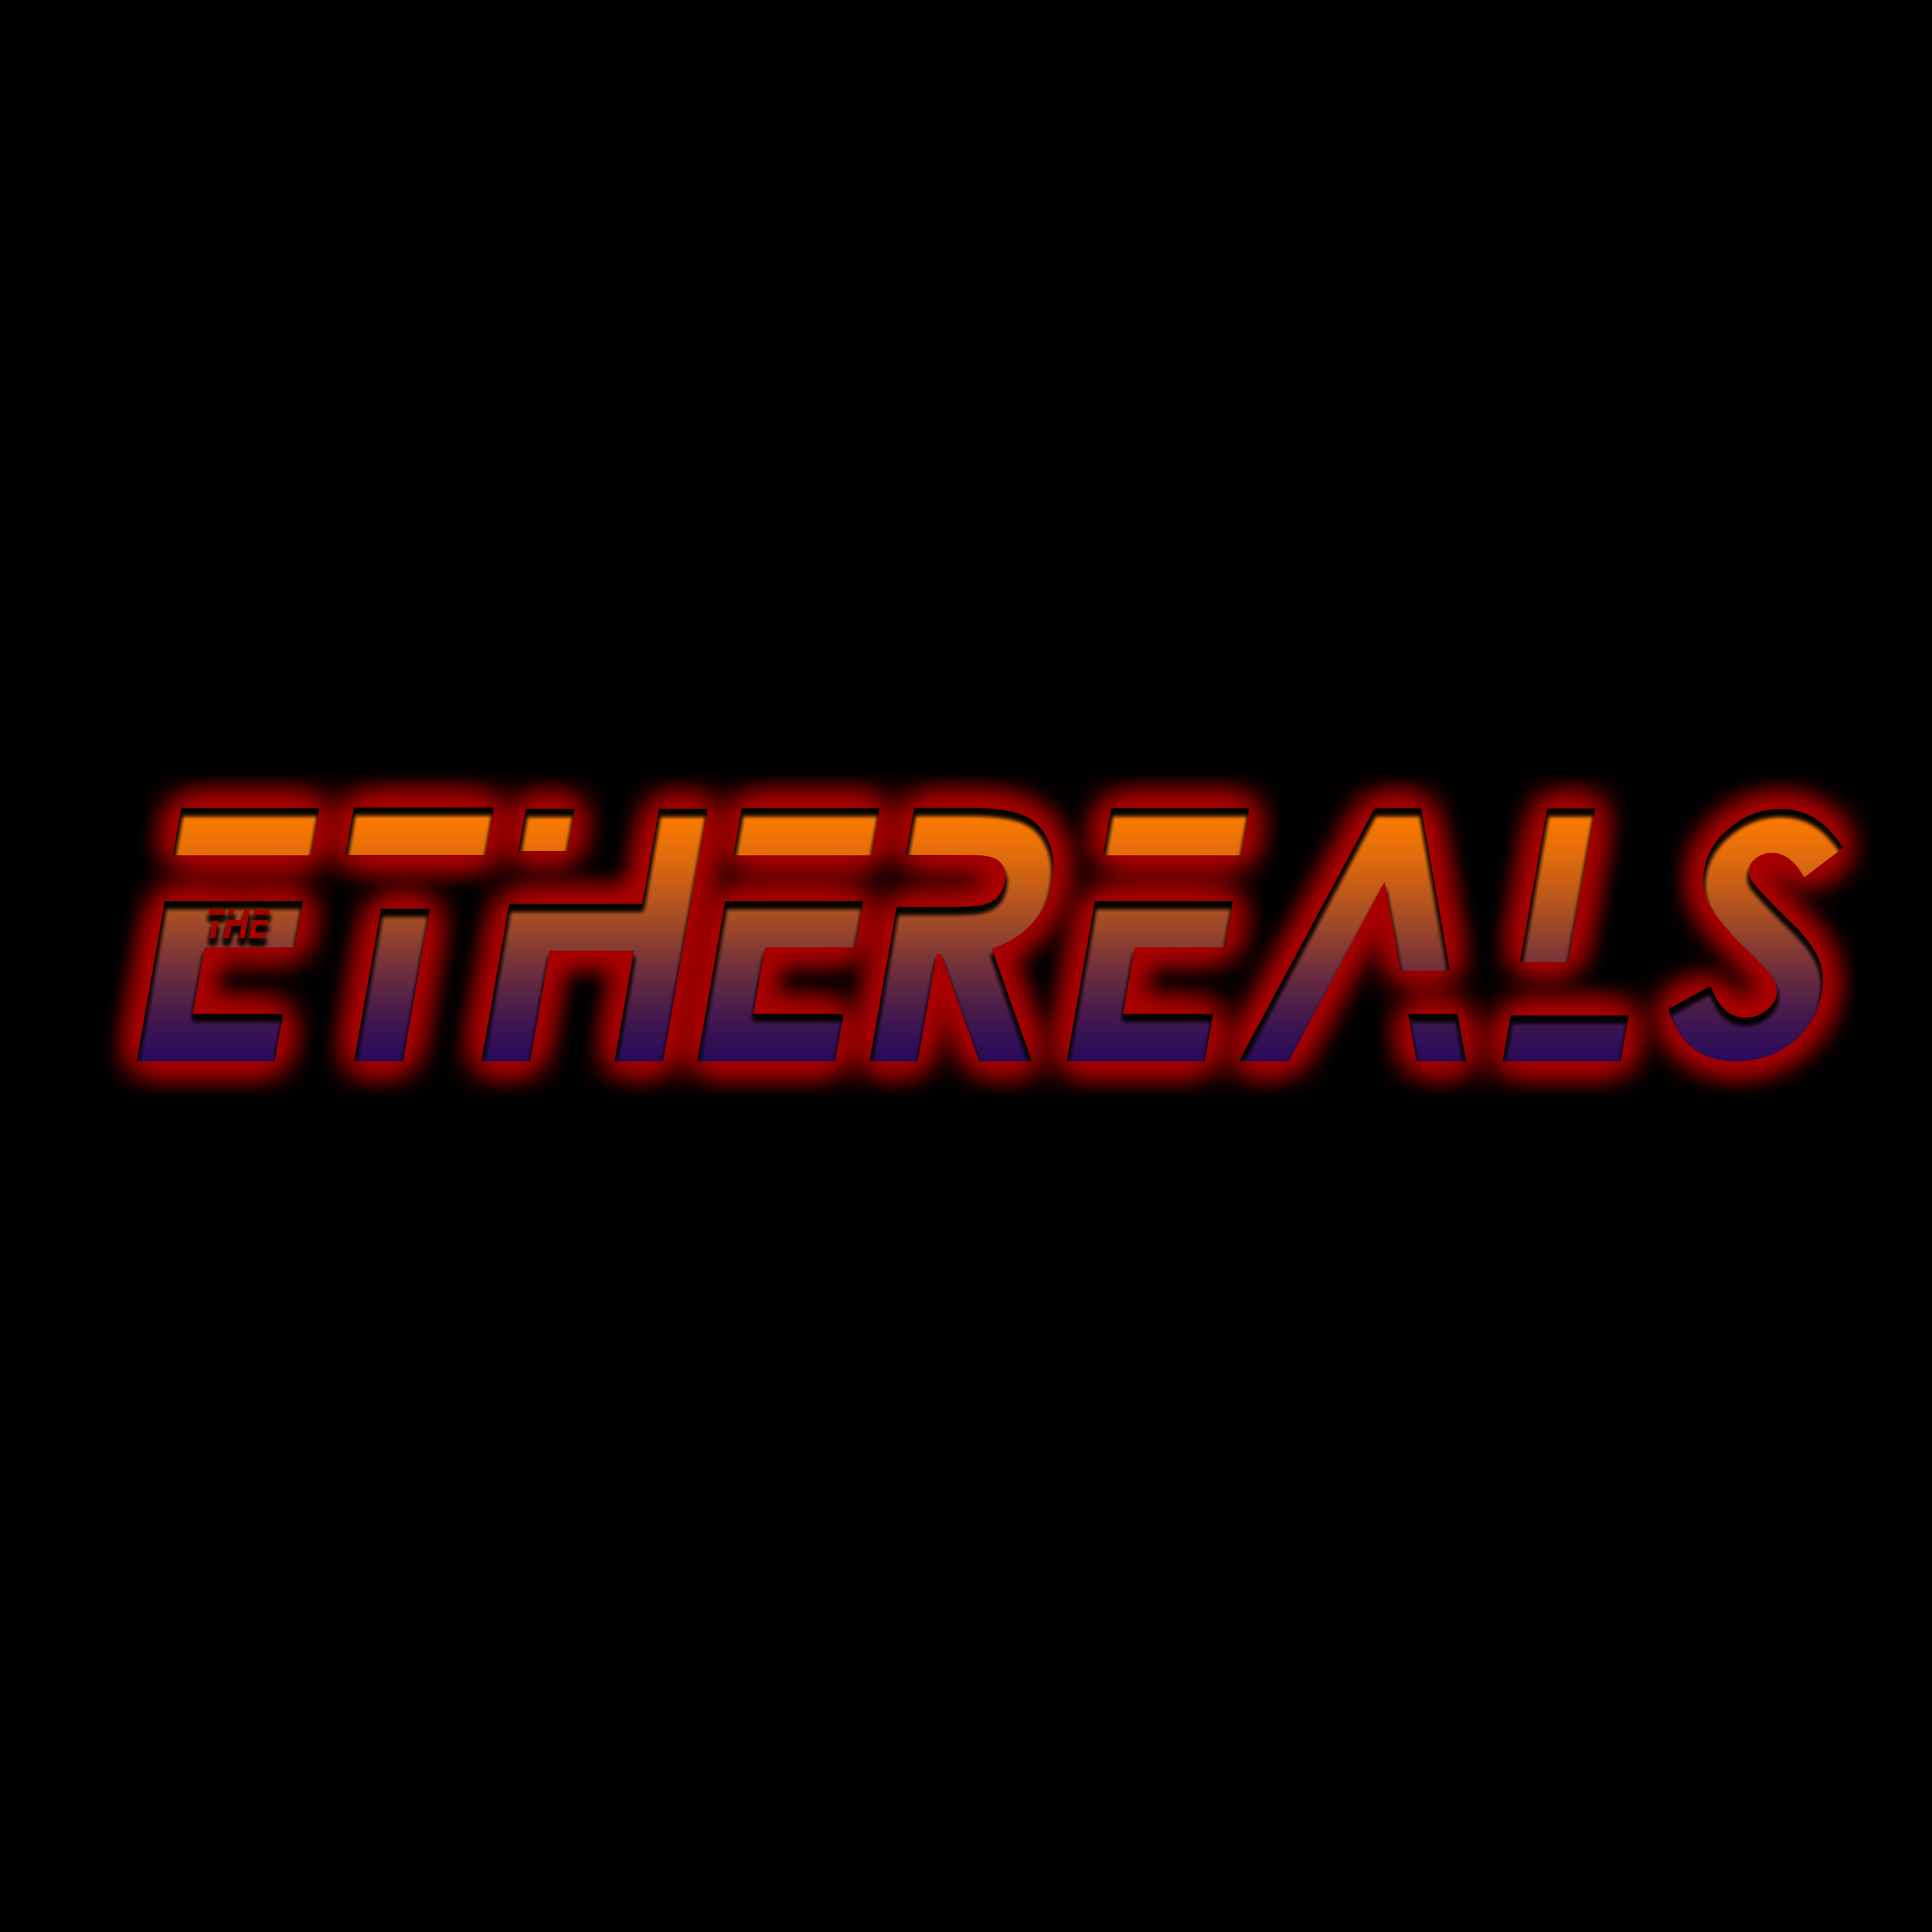 The Ethereals